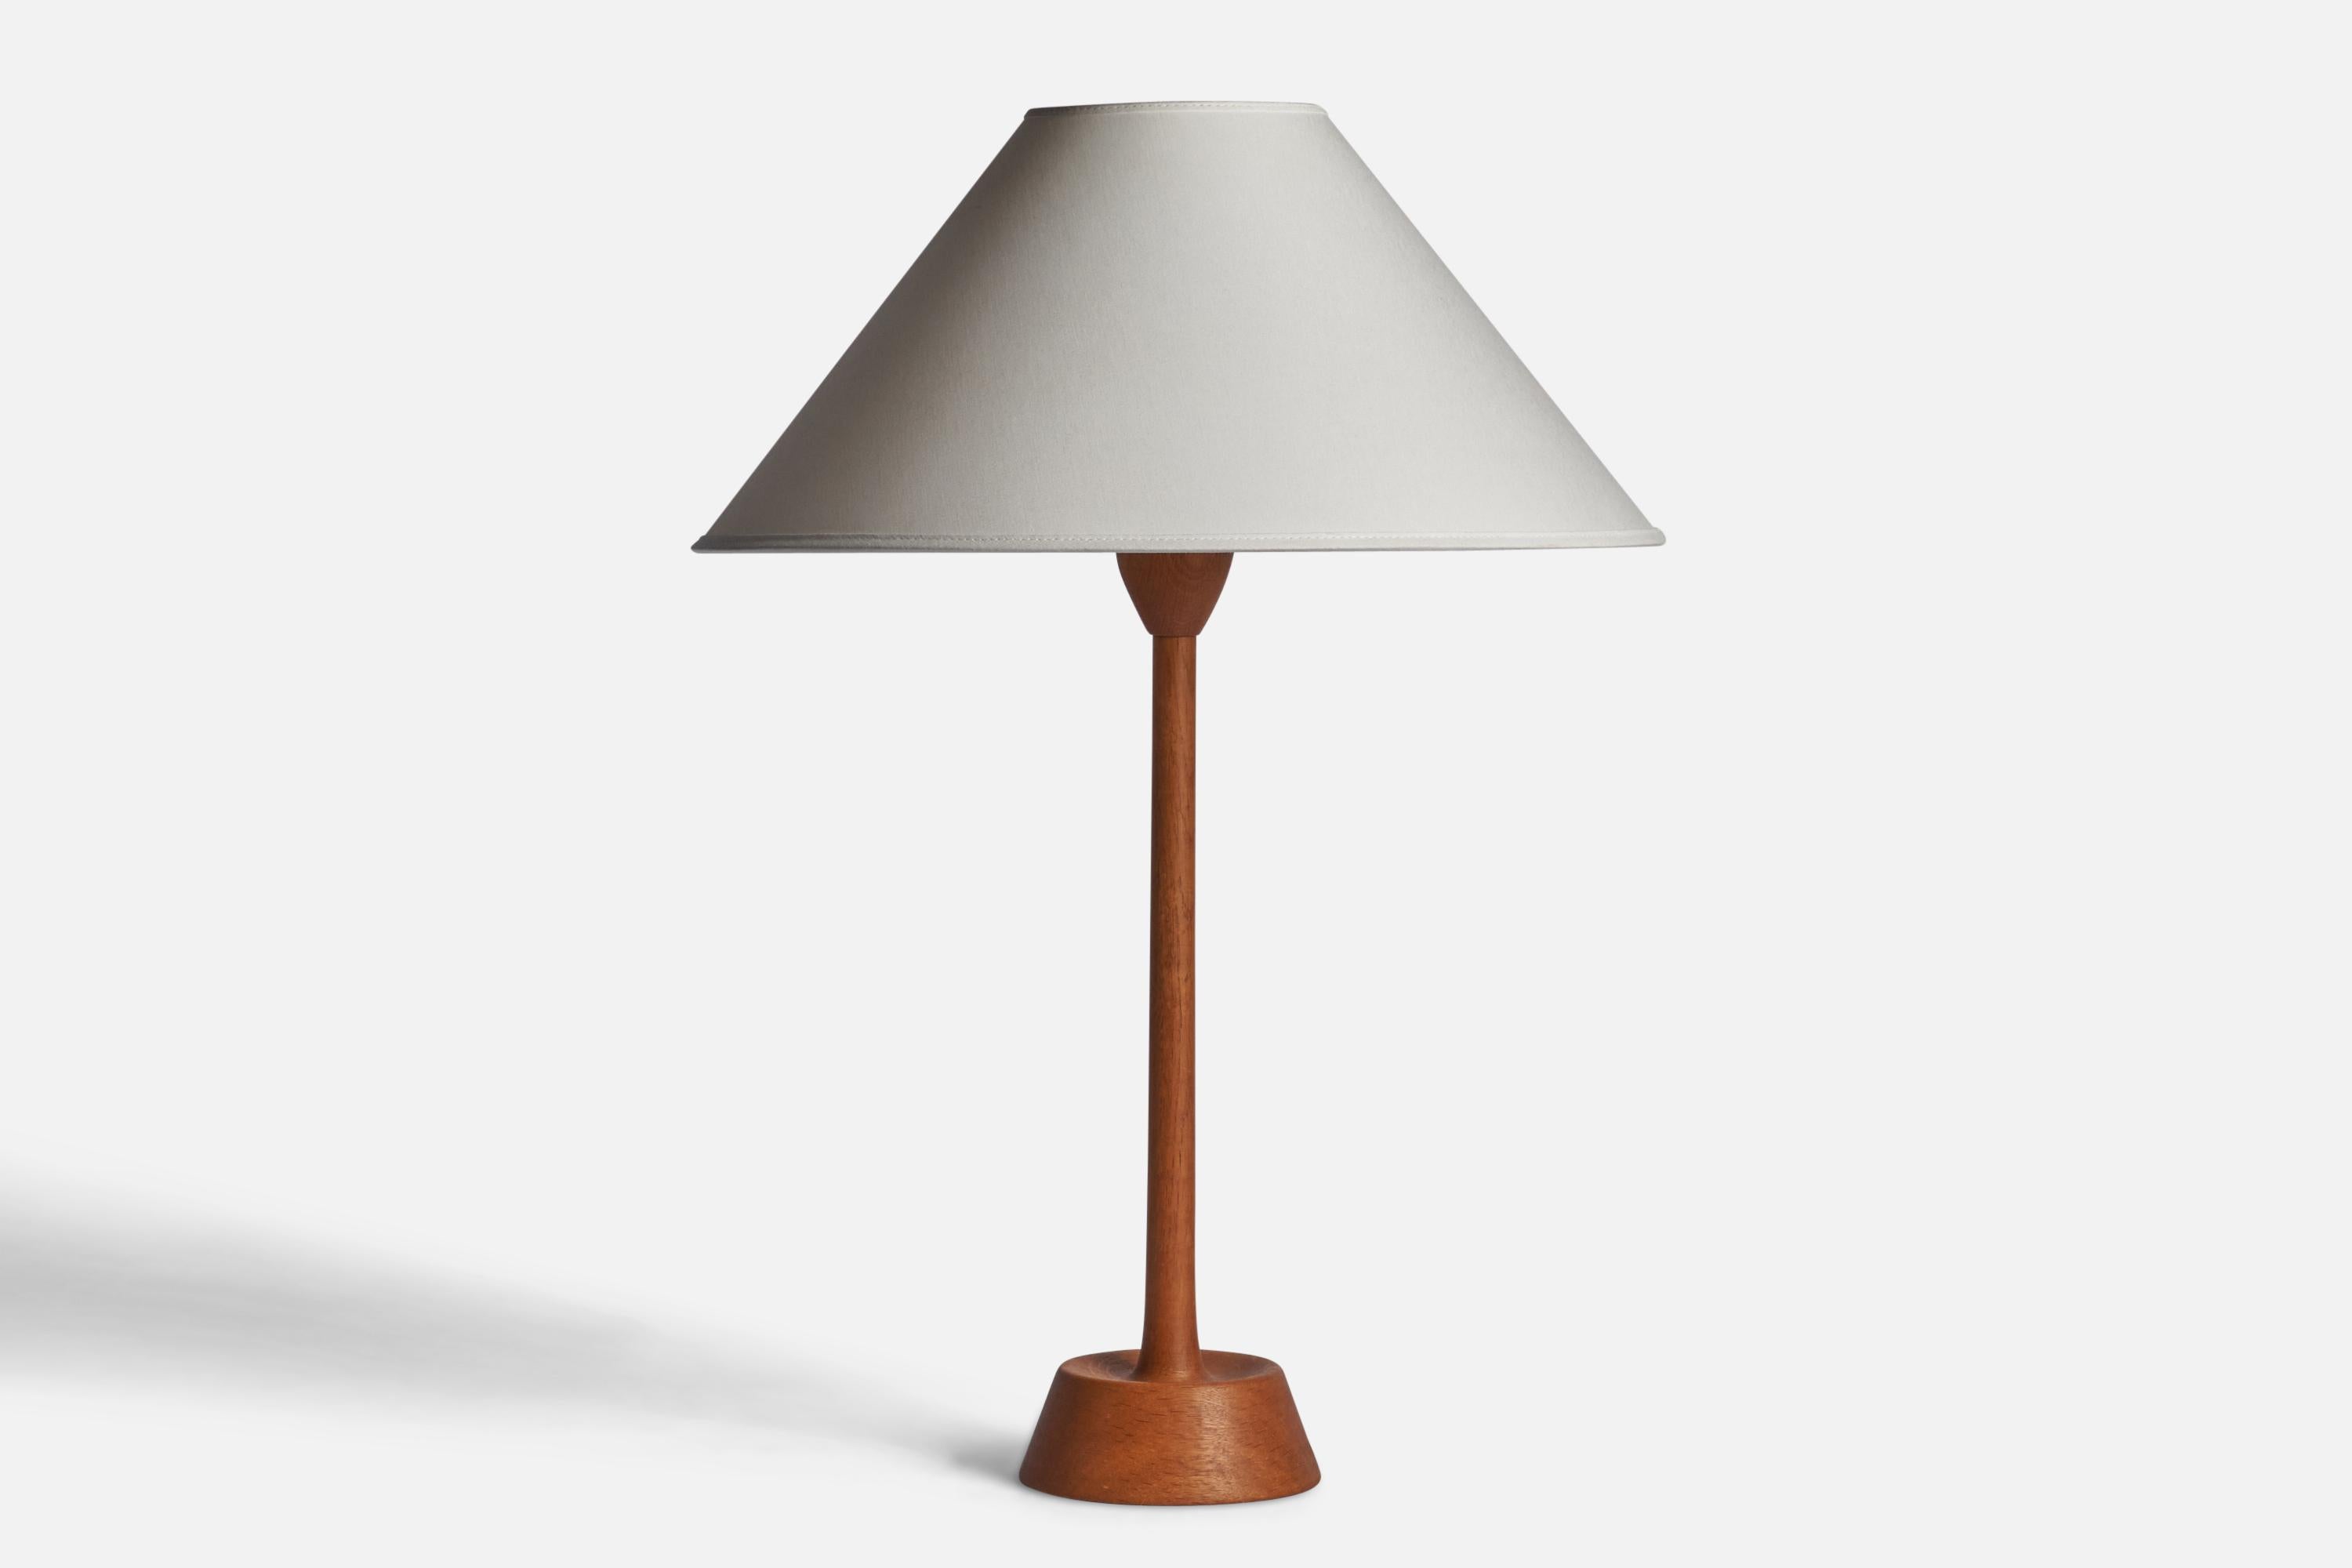 A teak table lamp designed and produced by Uno Kristiansson, Sweden, 1960s.

Dimensions of Lamp (inches): 17.75” H x 5” Diameter
Dimensions of Shade (inches): 4.5” Top Diameter x 16” Bottom Diameter x 7.25” H
Dimensions of Lamp with Shade (inches):